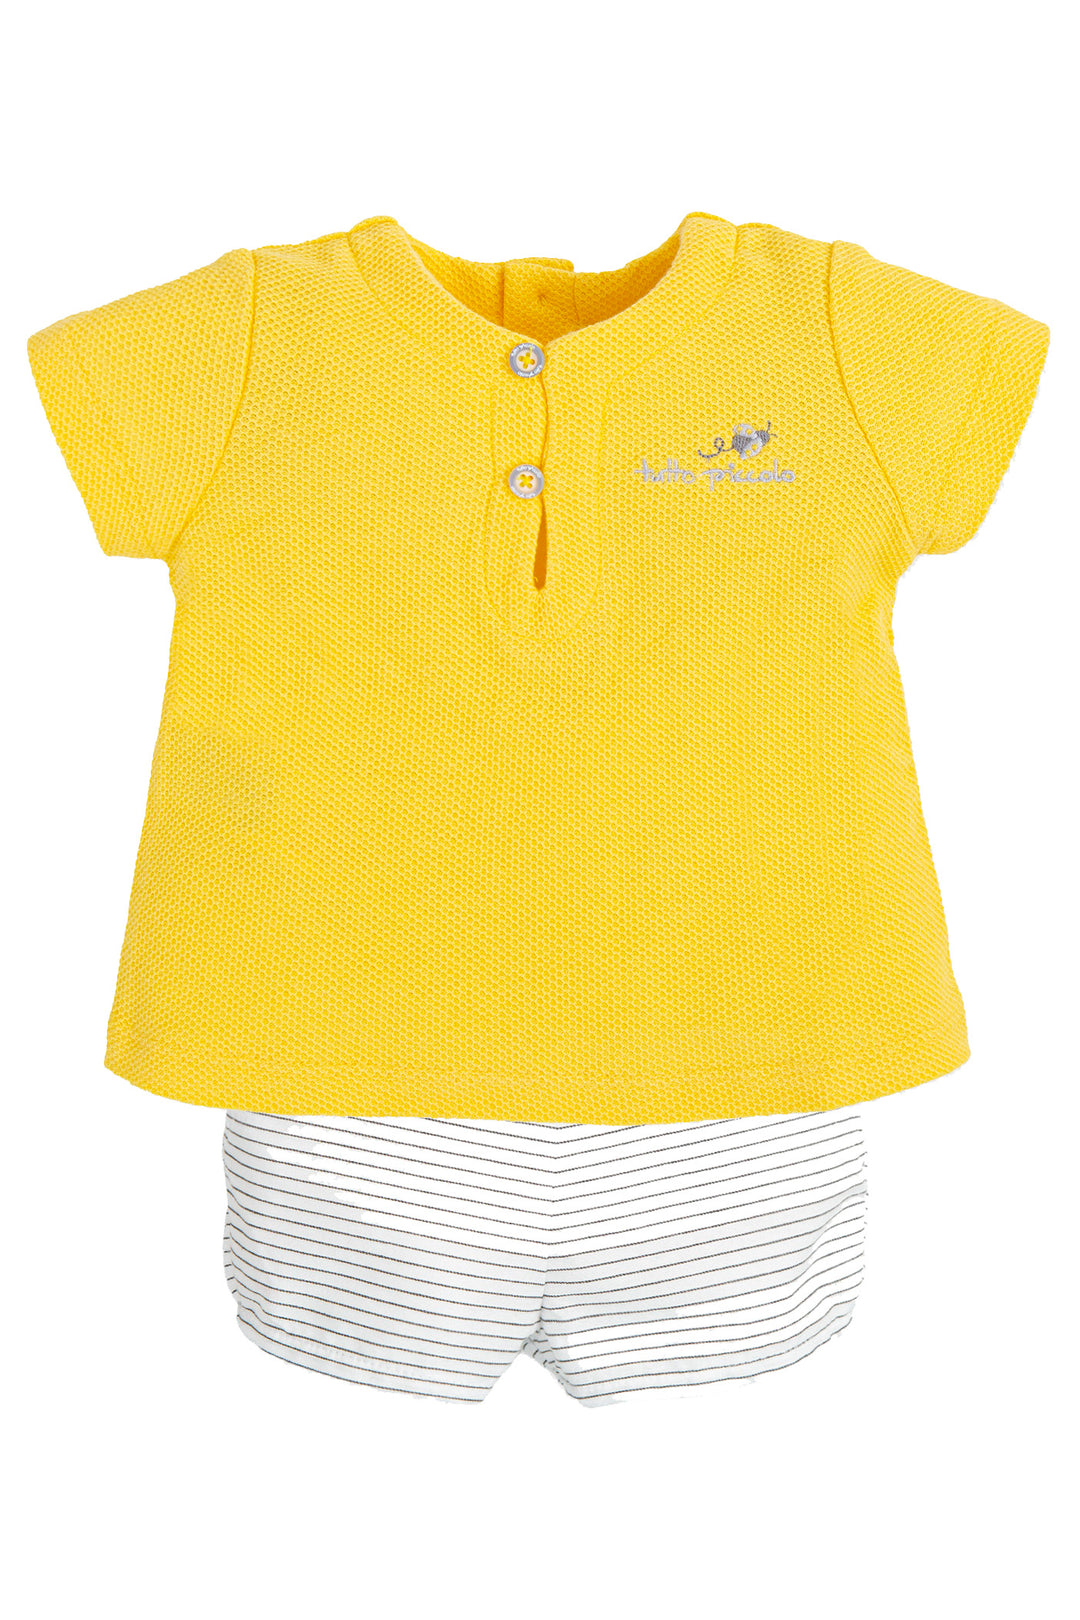 Tutto Piccolo "Julius" Yellow Top & Striped Jam Pants | Millie and John